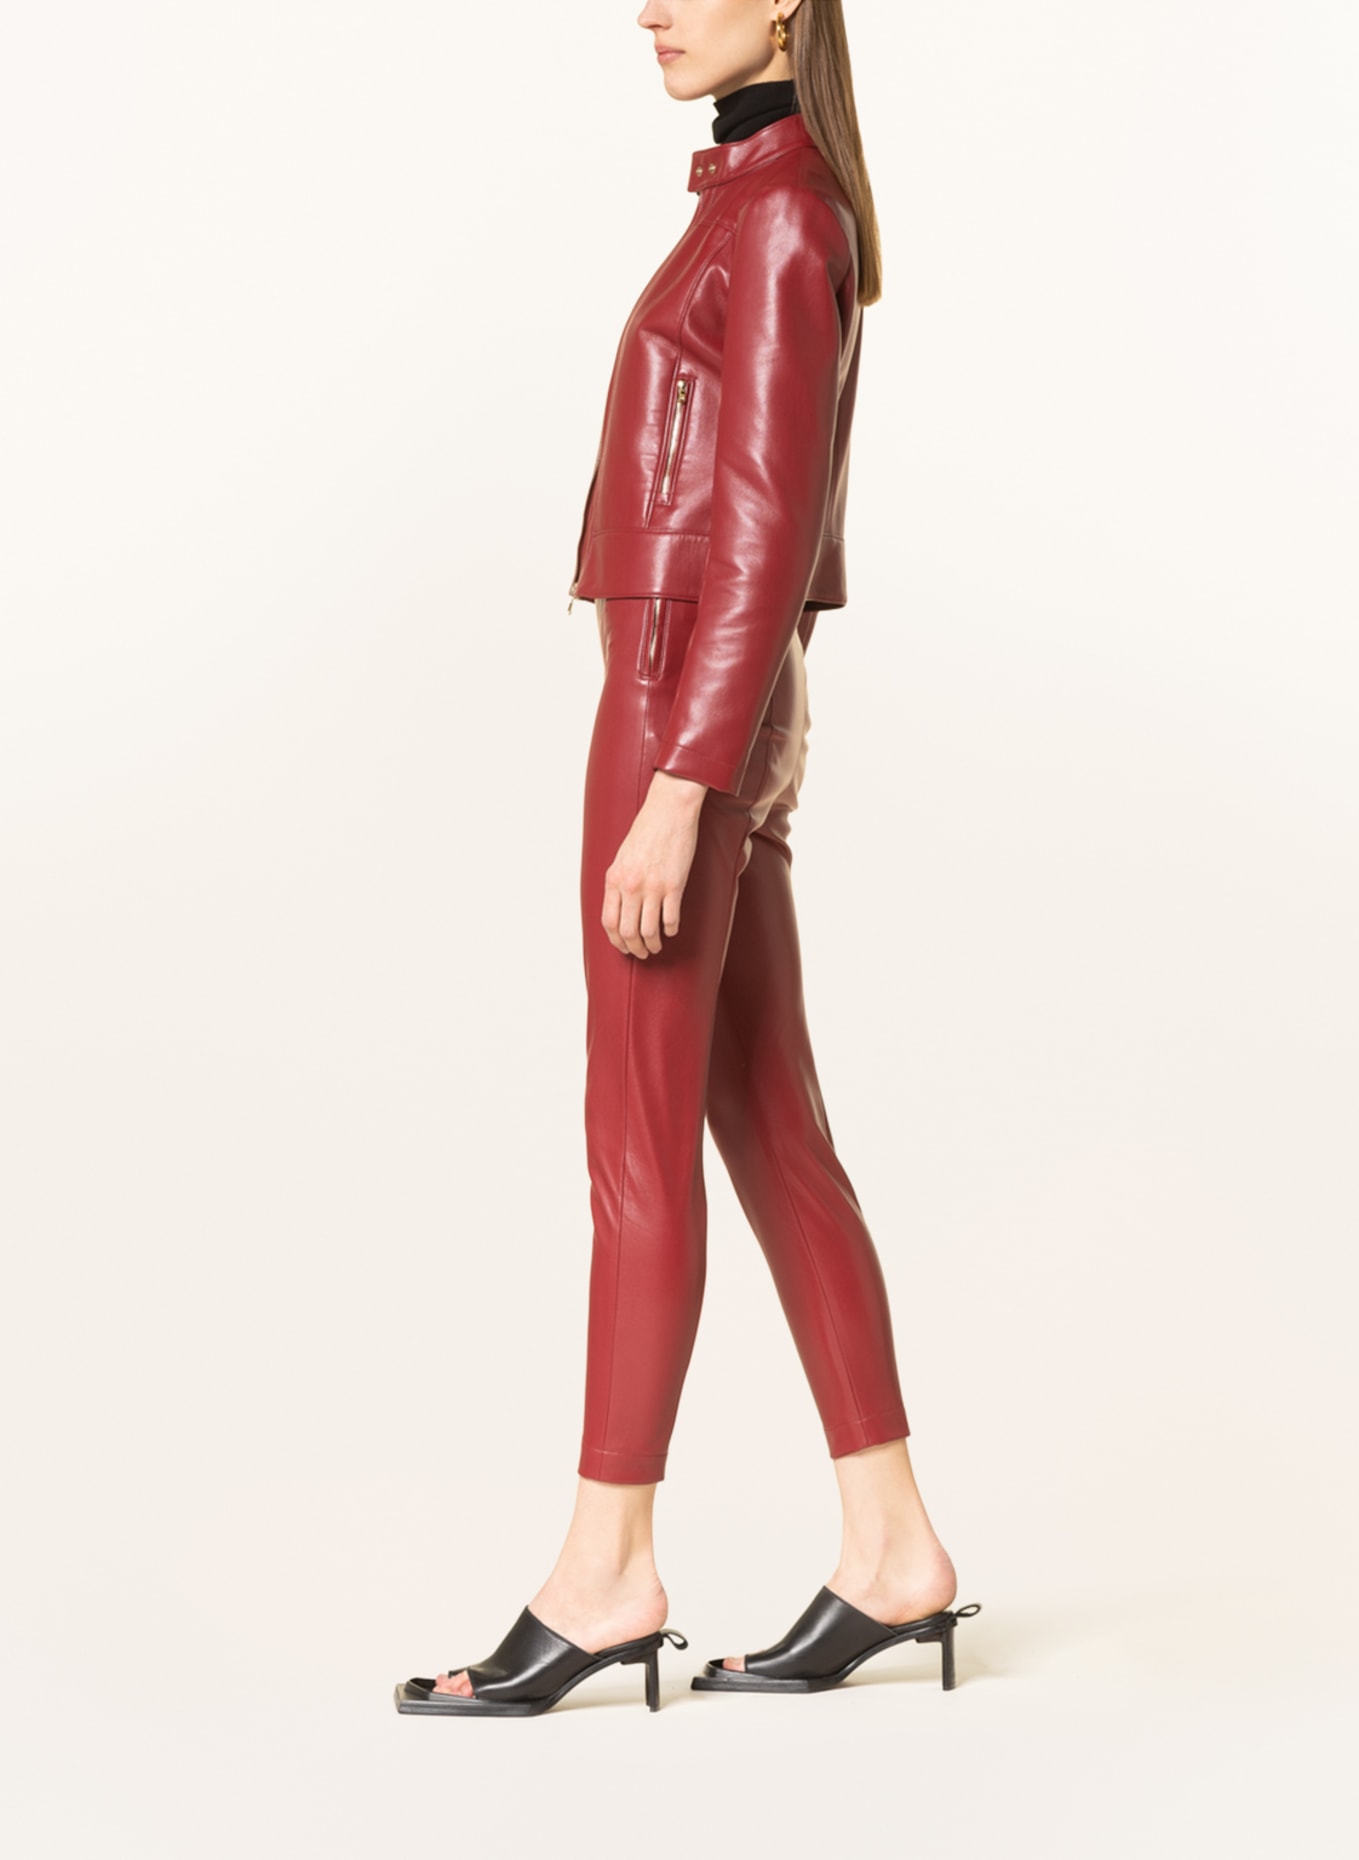 Leather Trousers  Red  women  36 products  FASHIOLAin